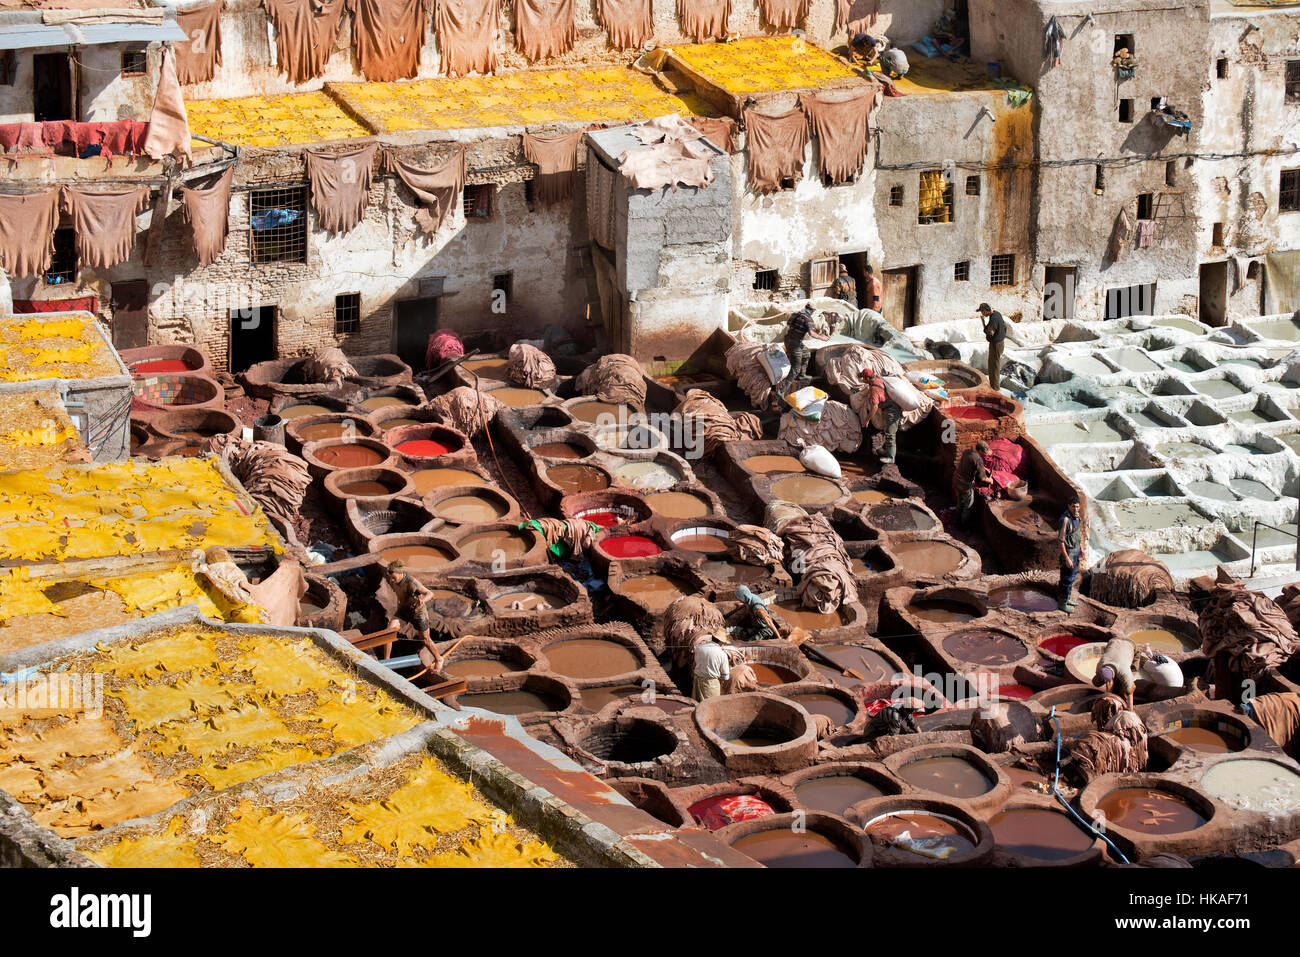 Leather tanning in the Tannera's Quarters in Fes Morocco Stock Photo